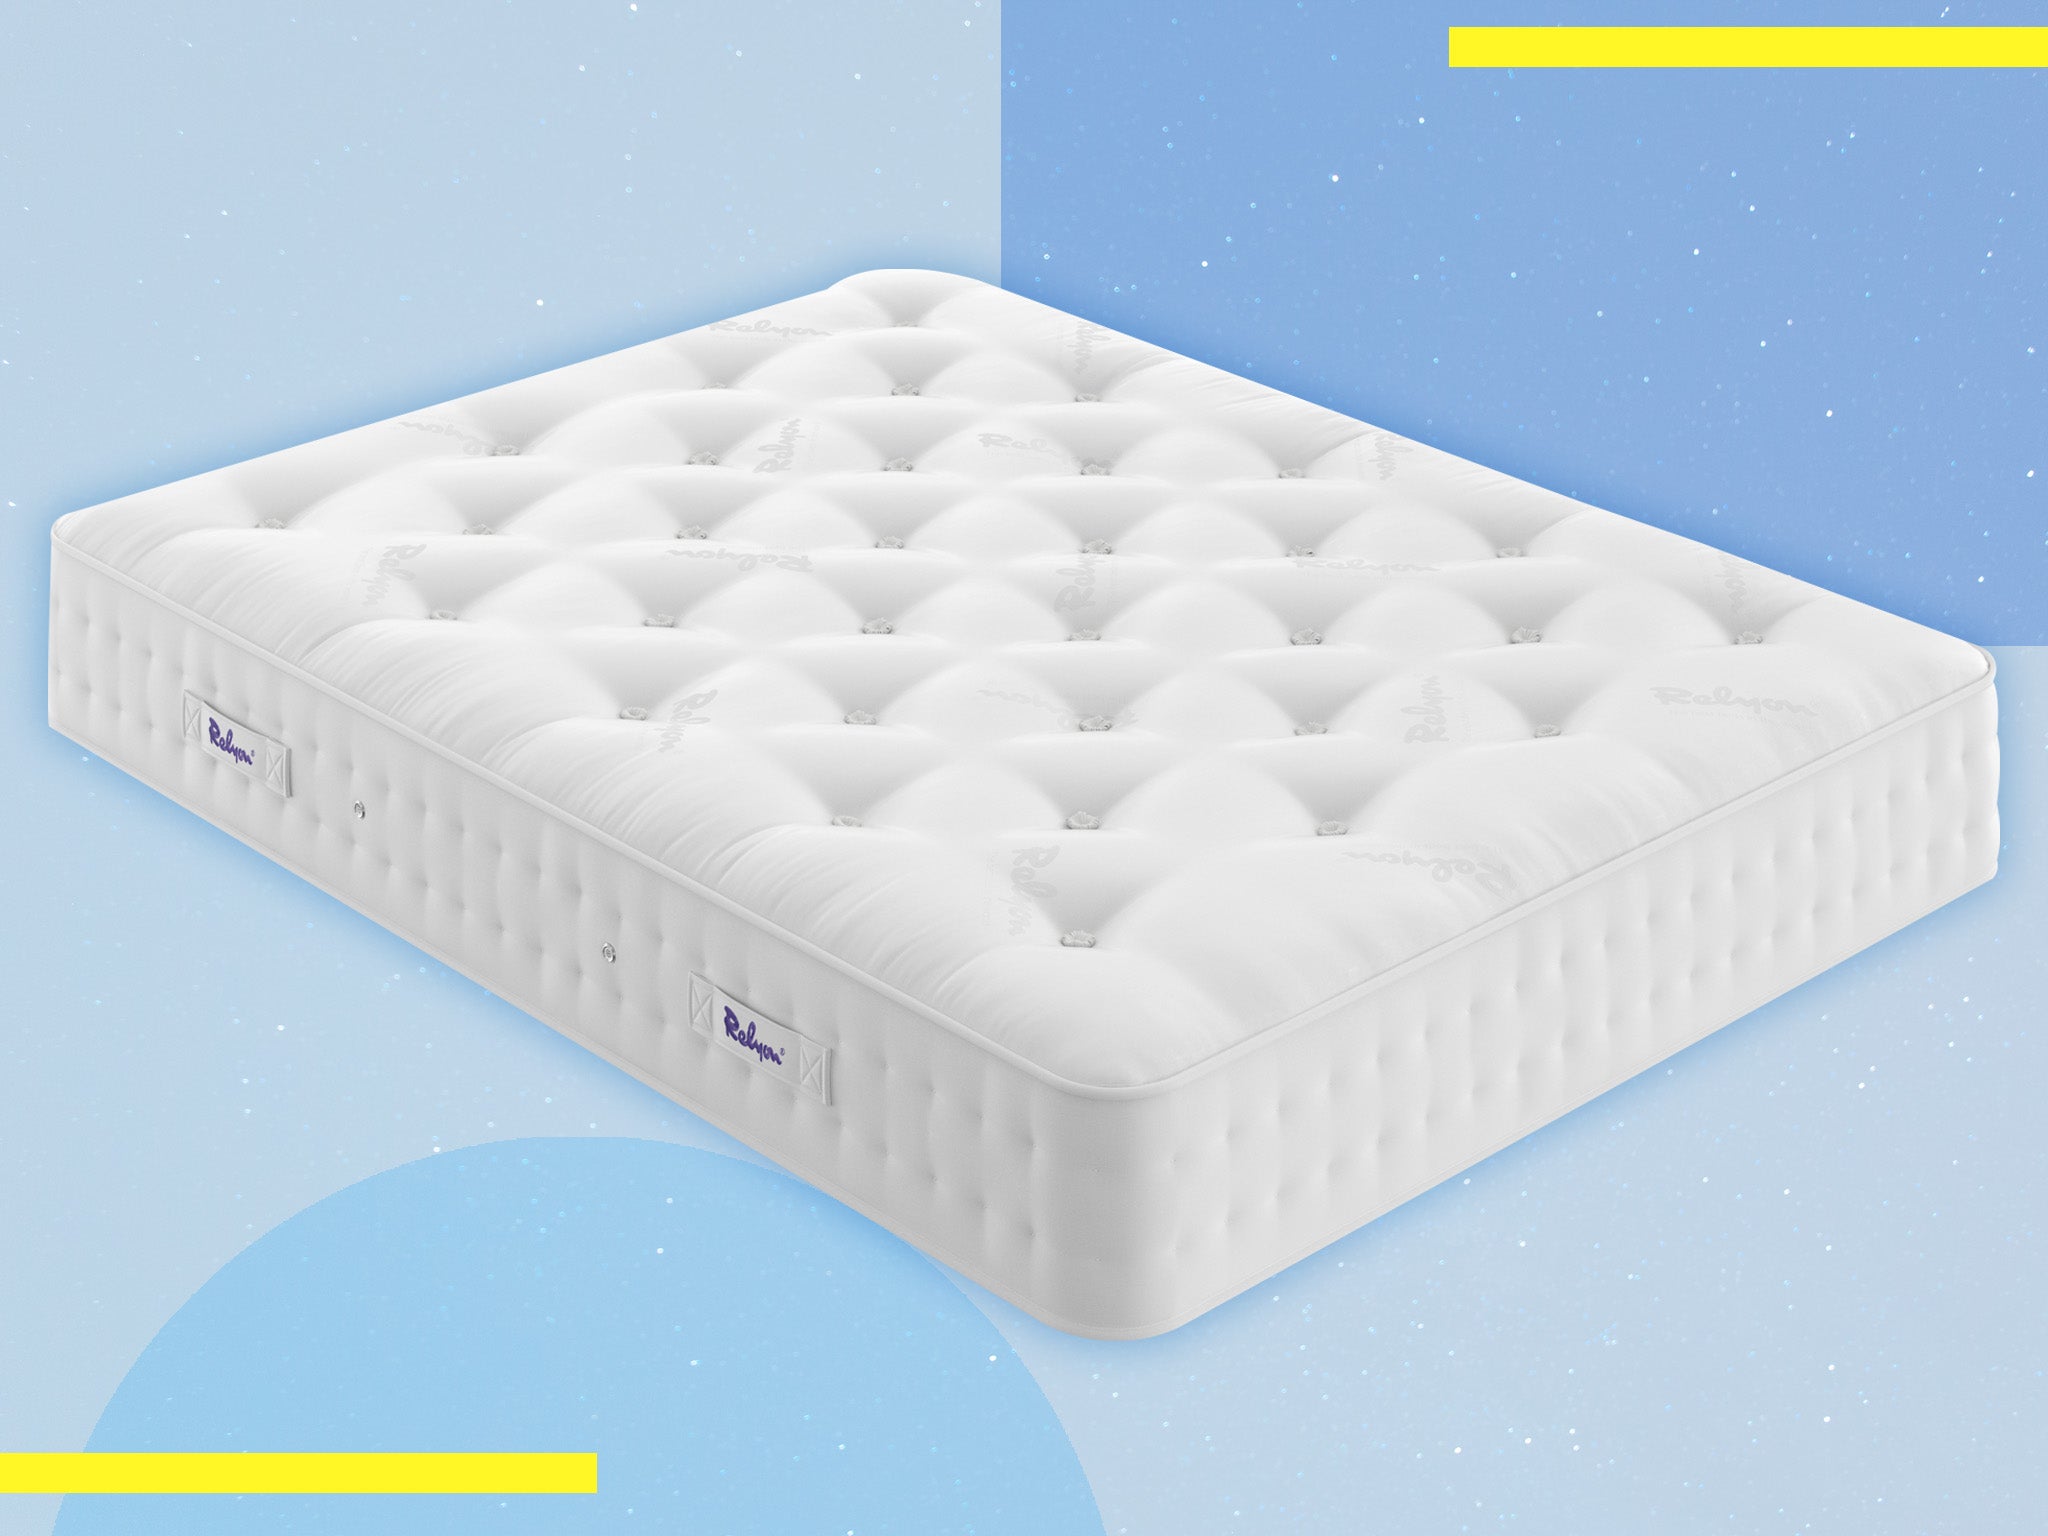 This Reylon model is a traditionally crafted pocket sprung mattress, rather than a hybrid